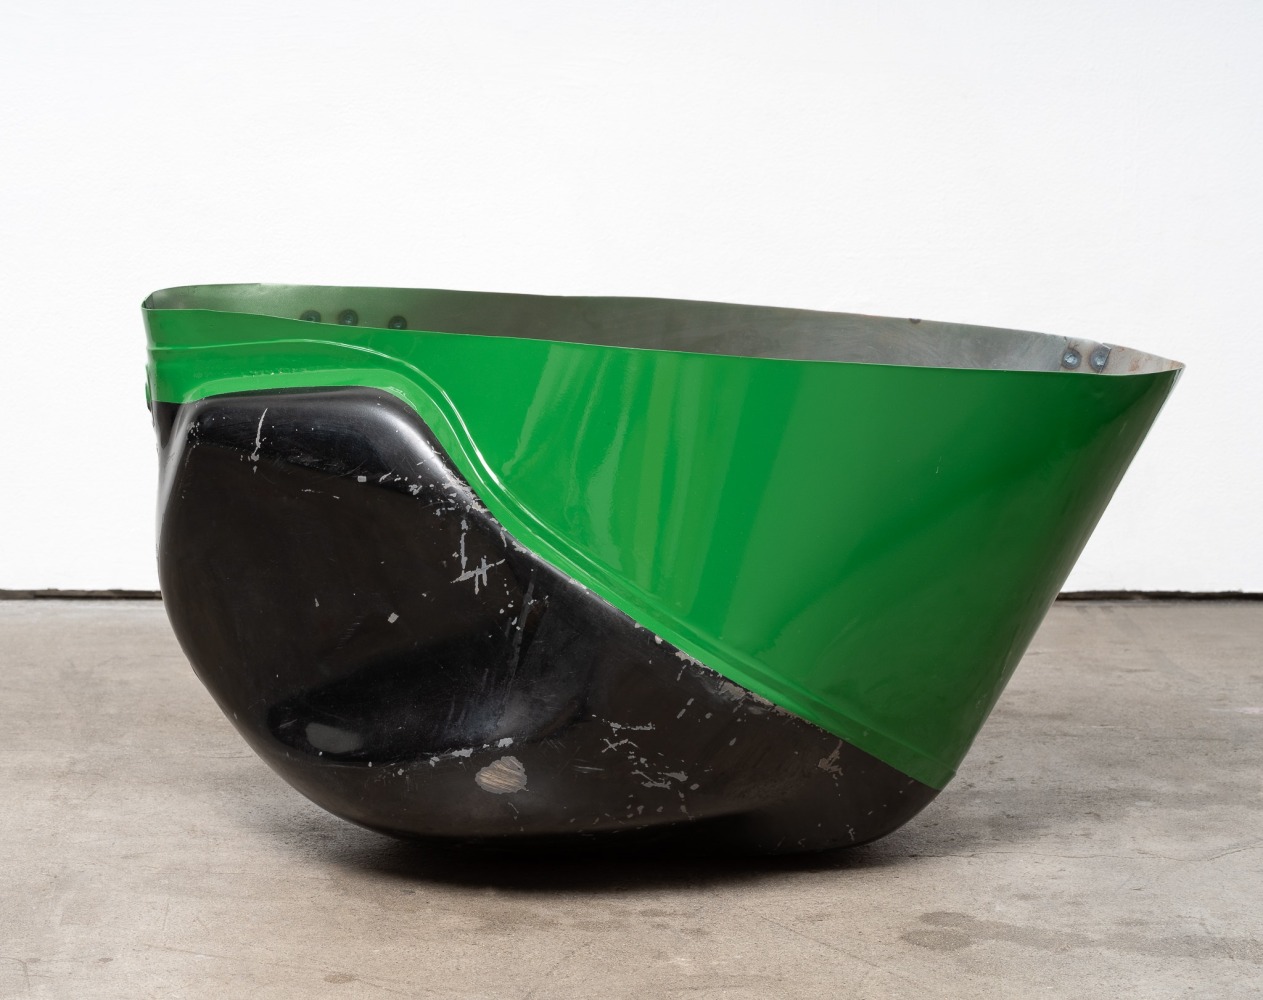 Elad Lassry

Untitled (Carrier, Glossy Black)

2019

Welded and painted steel

29 1/2 x 14 3/4 x 14 1/2 inches (74.9 x 37.5 x 36.8 cm)

Unique

EL 516

$35,000

&amp;nbsp;

INQUIRE